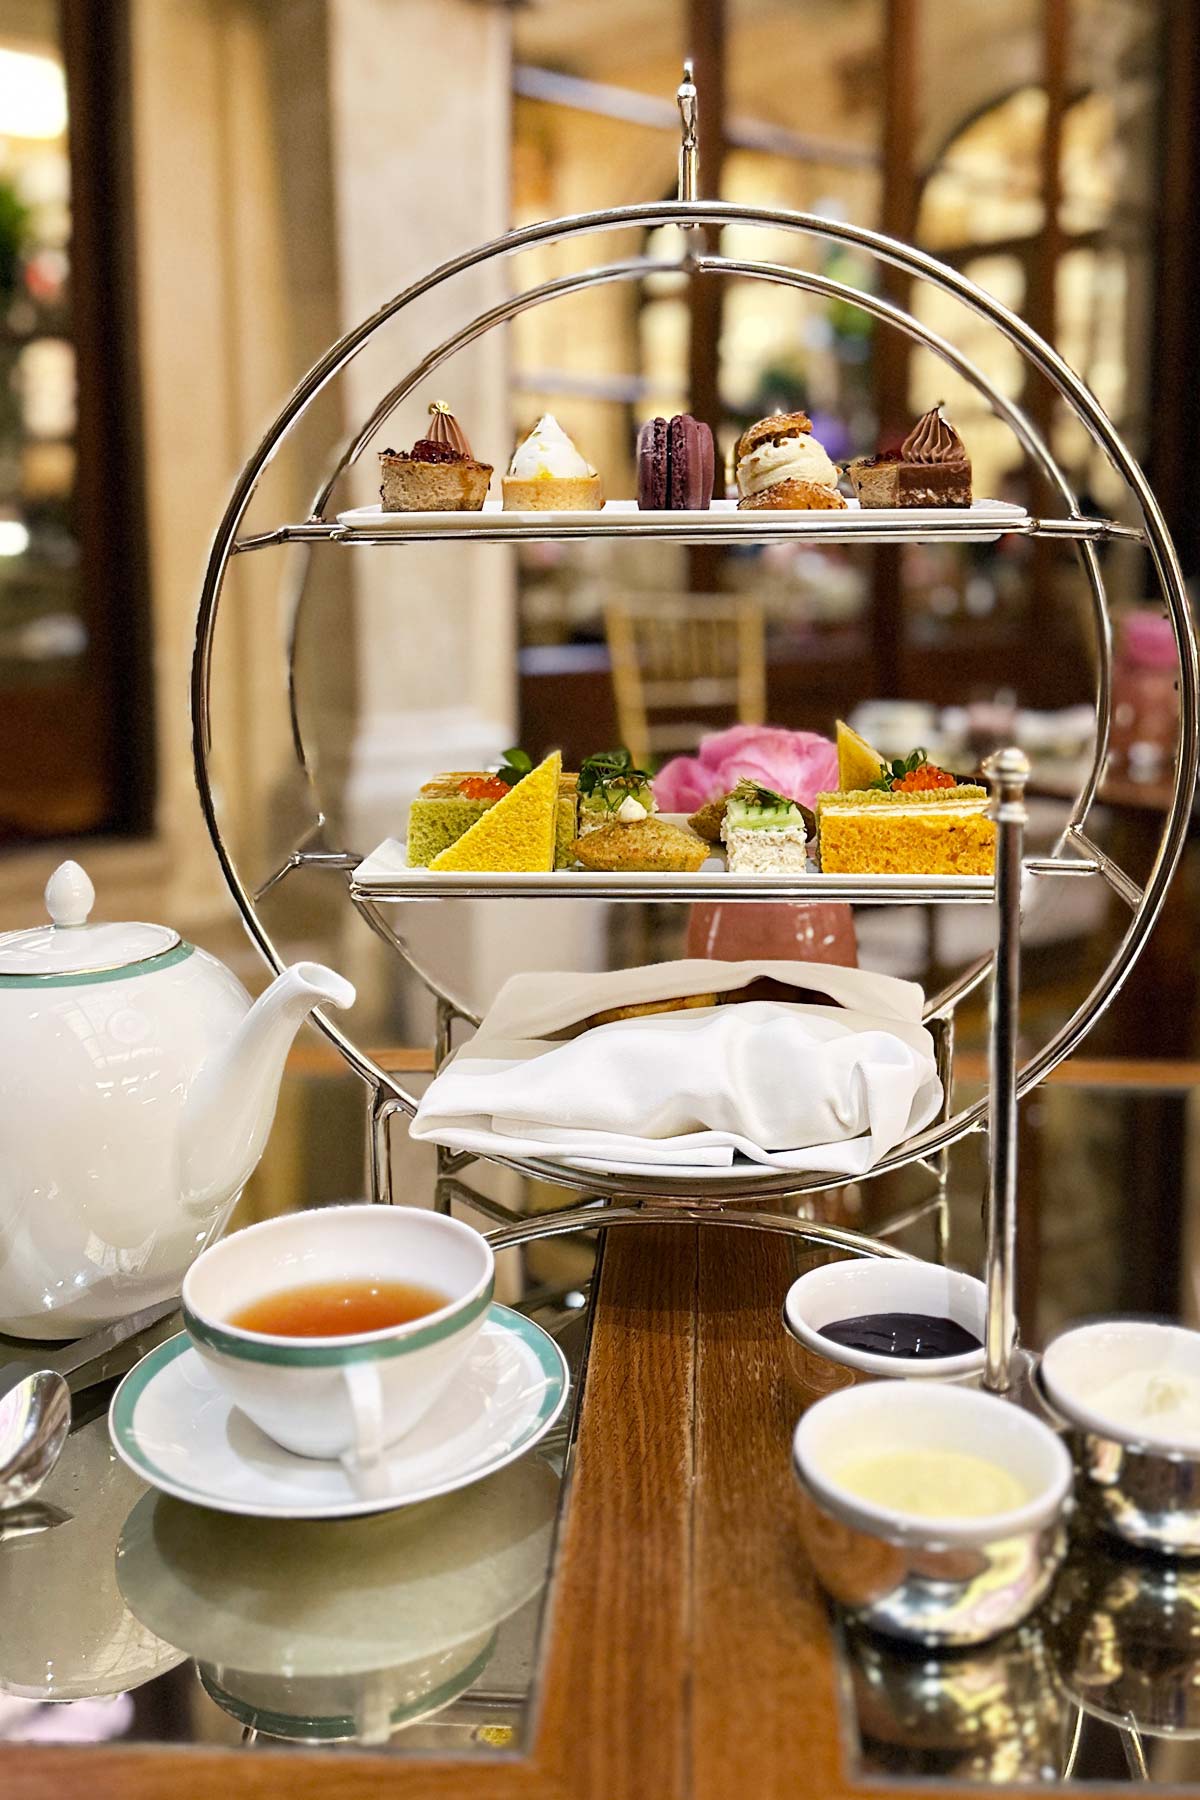 Three-tiered tray filled with food on a table with tea cup and teapot.